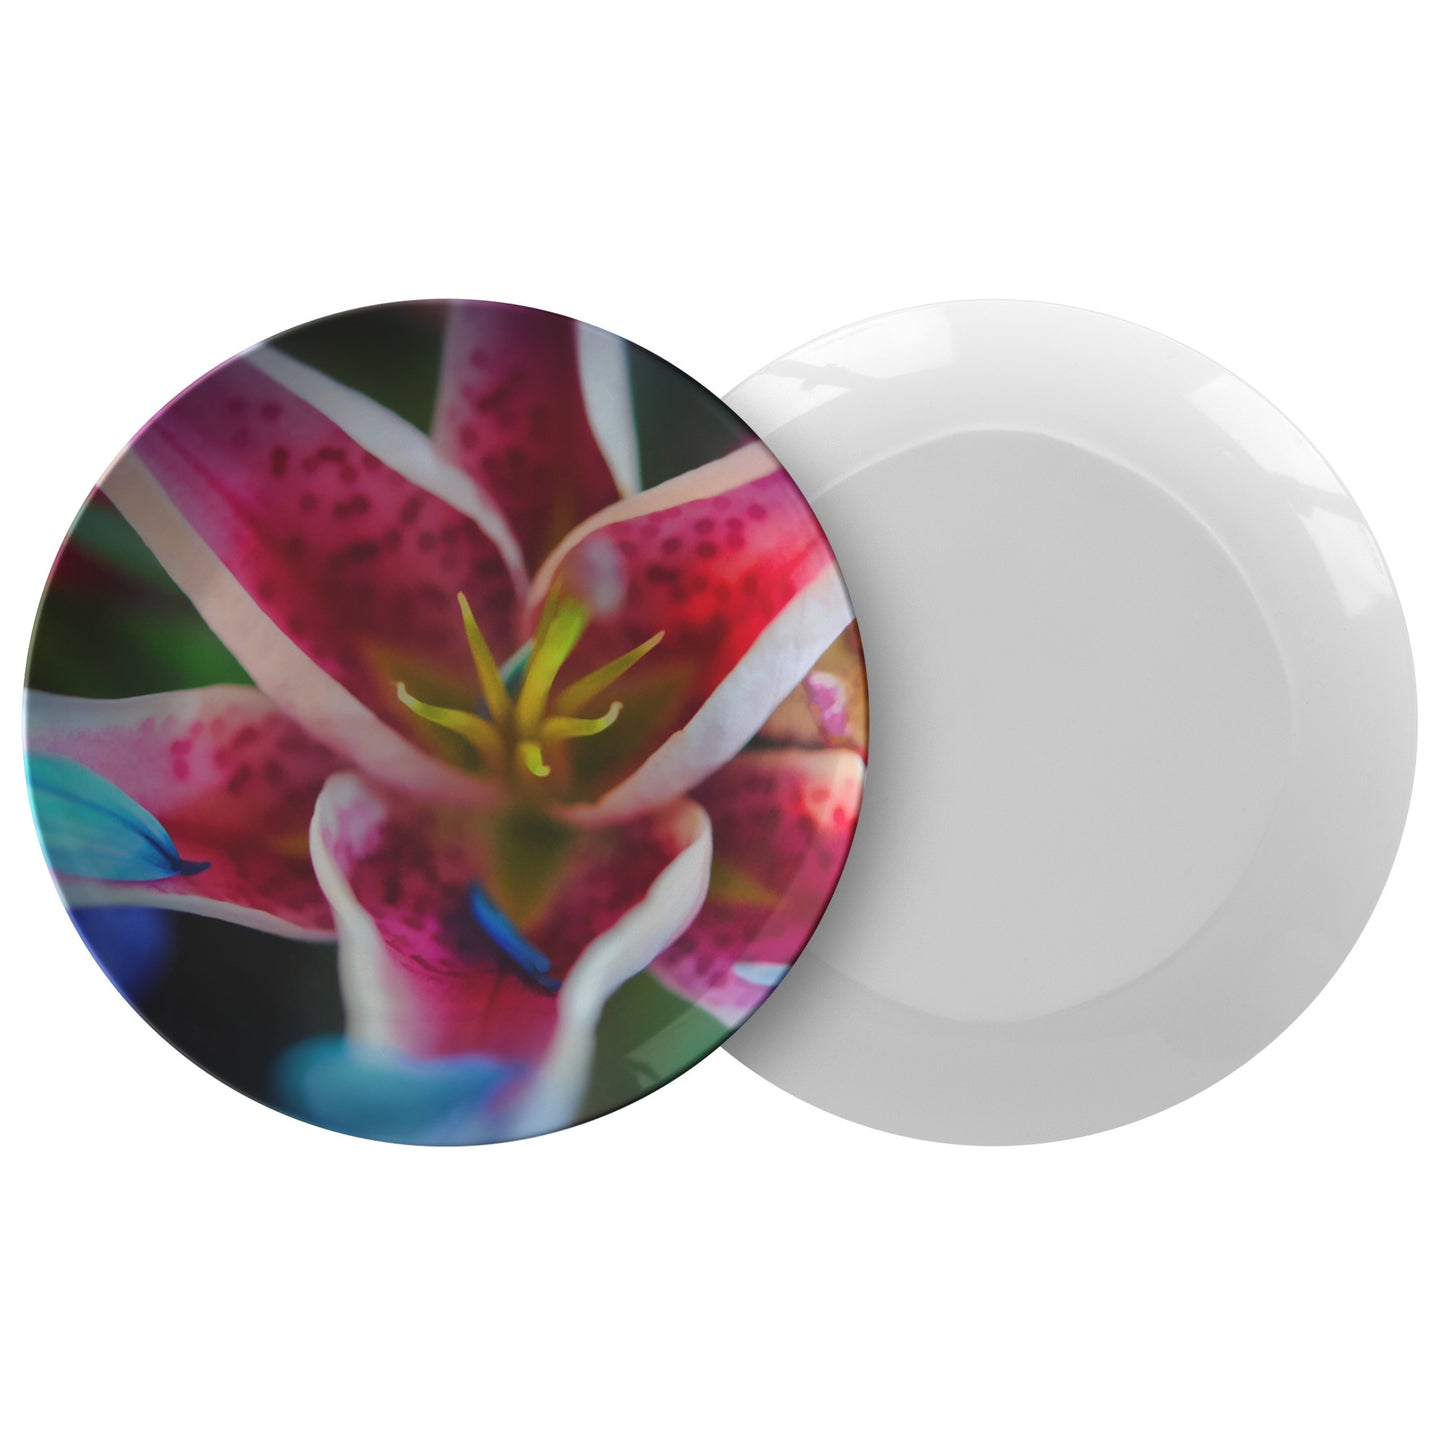 Blue Petals On a Pink and White Lily Dinner Plate